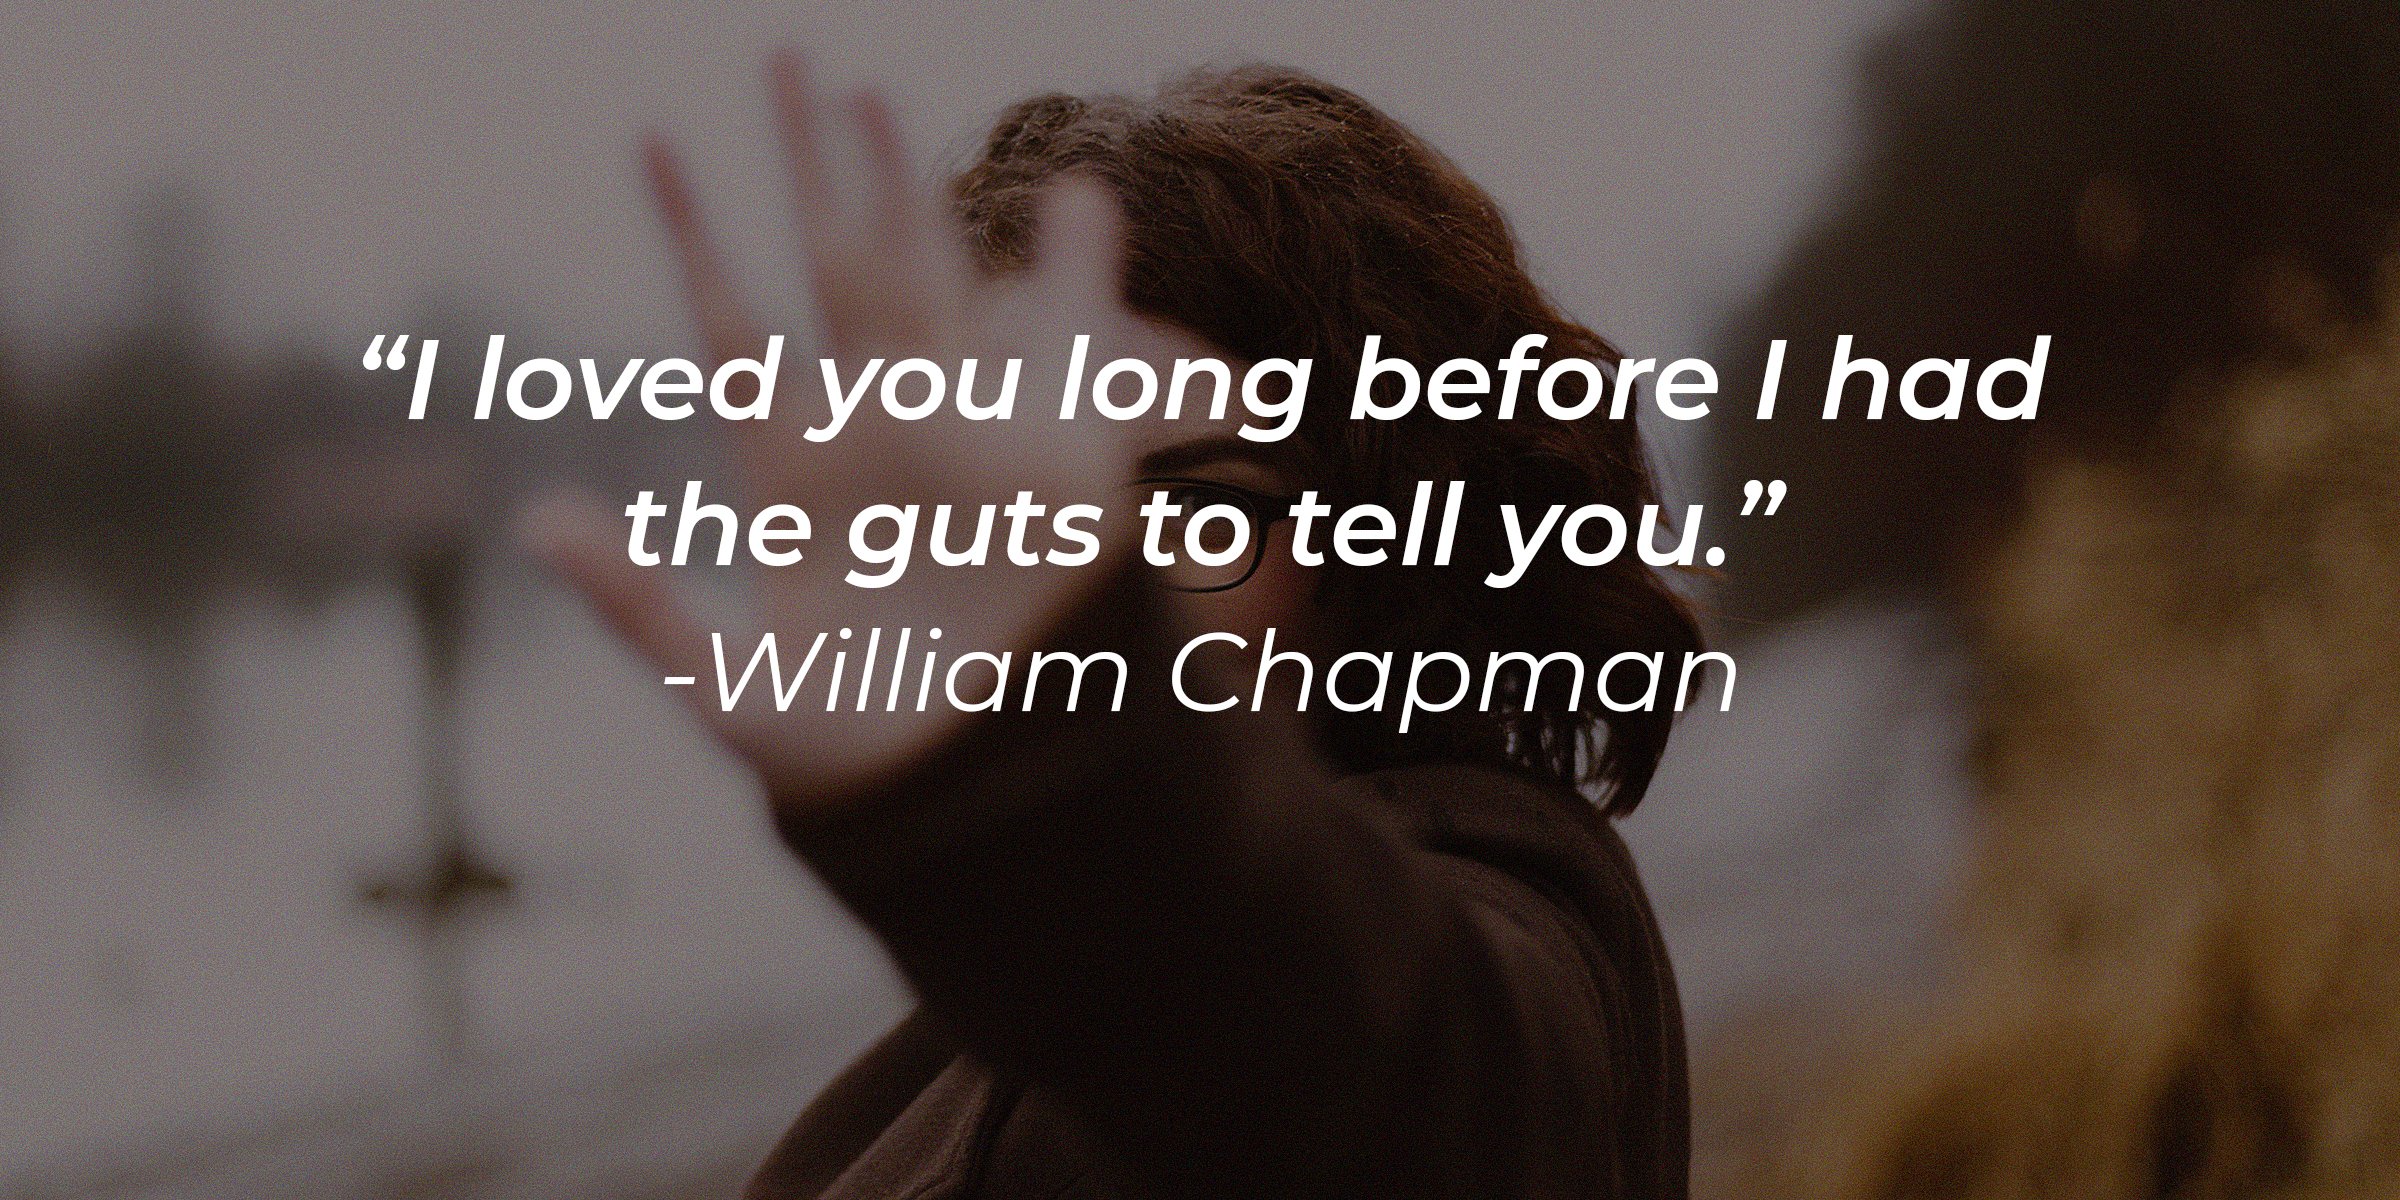 William Chapman's quote: “I loved you long before I had the guts to tell you.” | Image: AmoDays